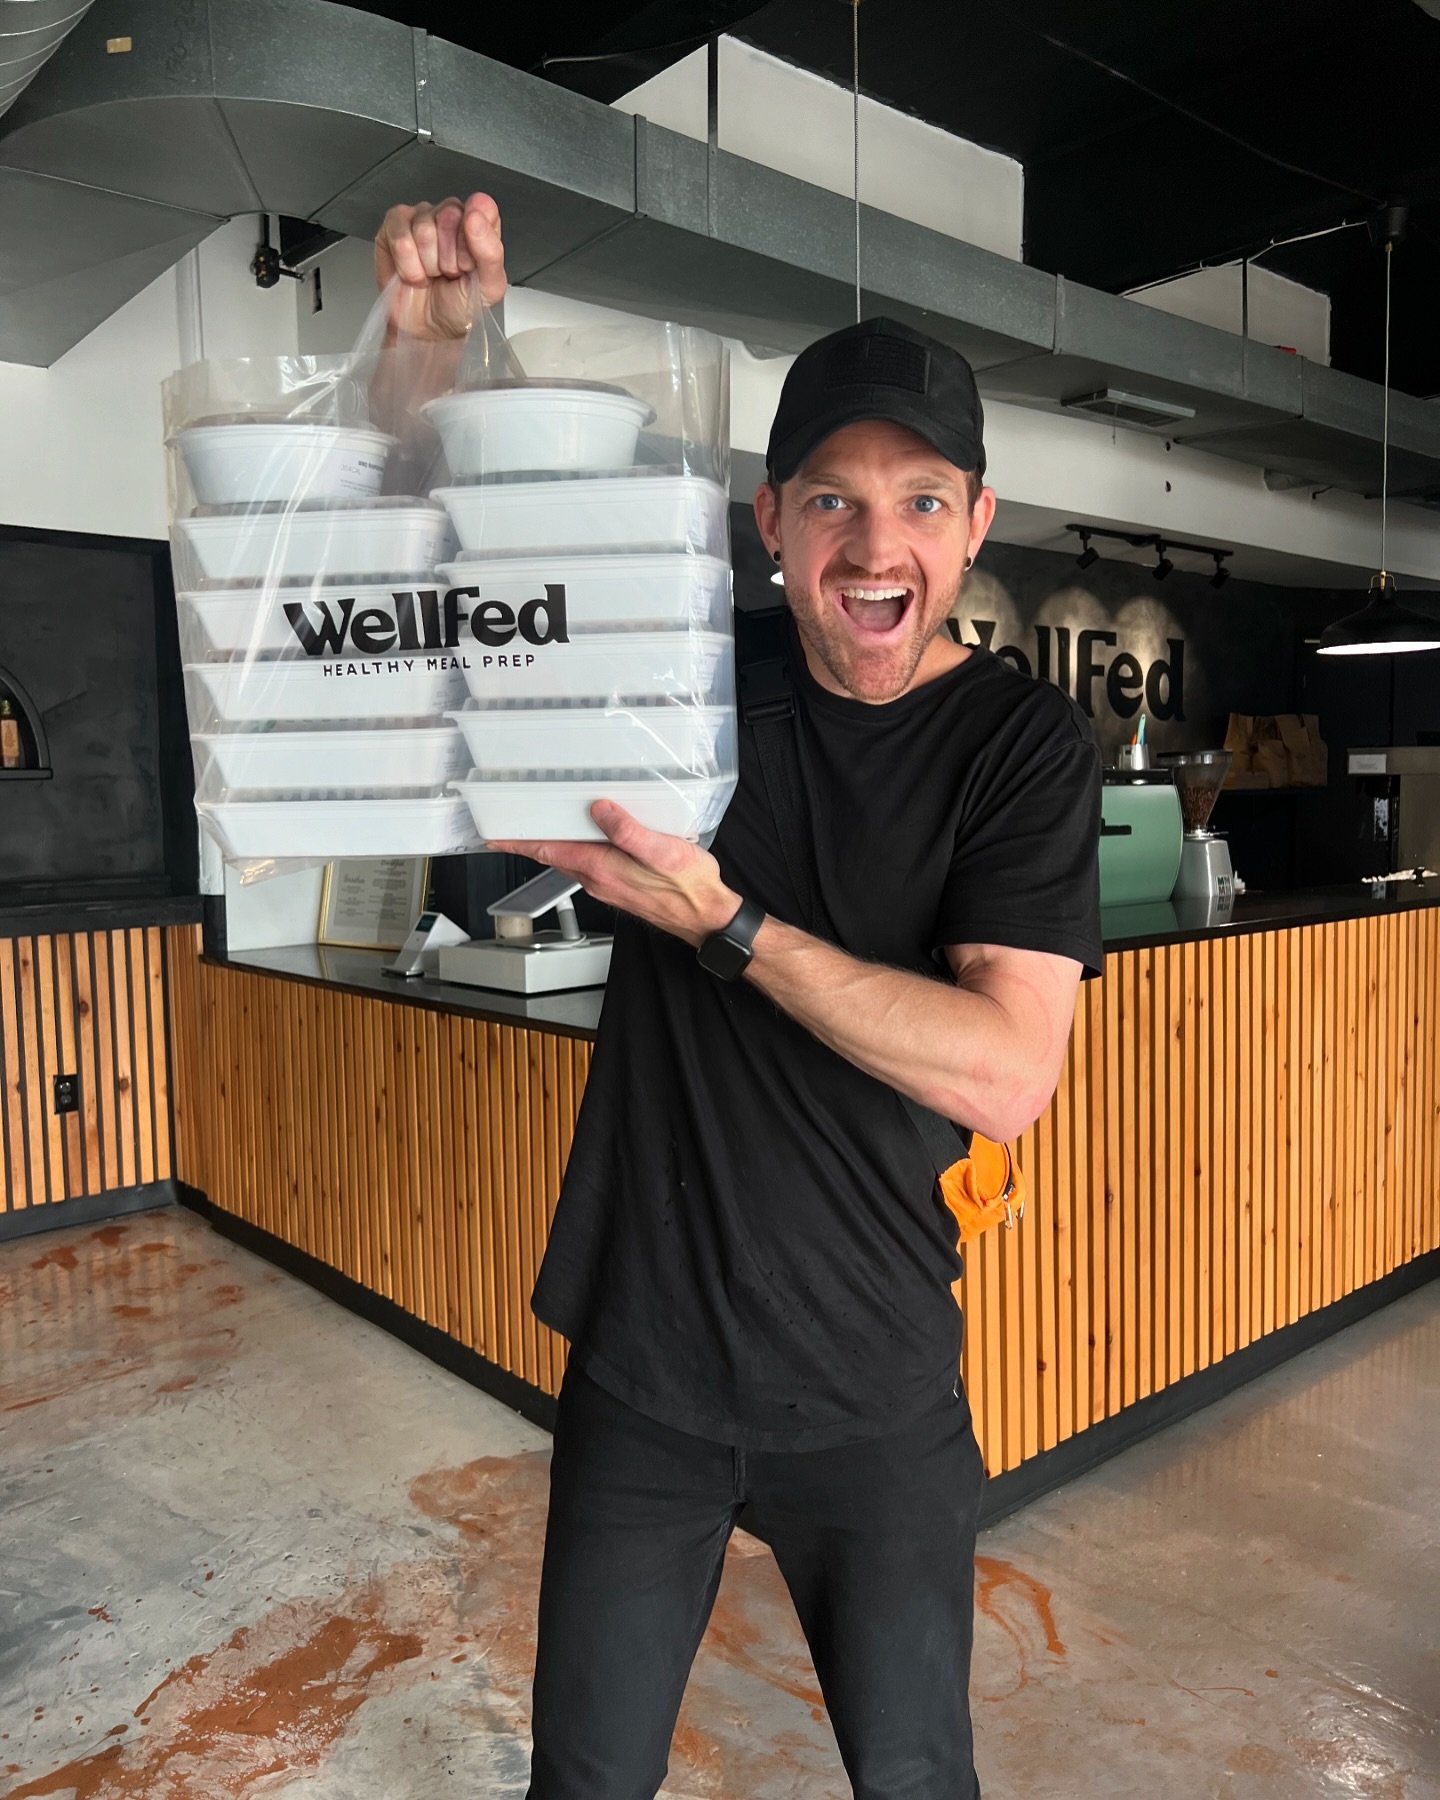 Forgot to order? Don&rsquo;t worry, we can still take care of ya. Stop in to stock up on meals and snacks, and grab a coffee while your at it. Let&rsquo;s have a great week! 

#wellfed #fridgeporn #healthyfood #phillyfoodie #prettyfood #mealprep #foo